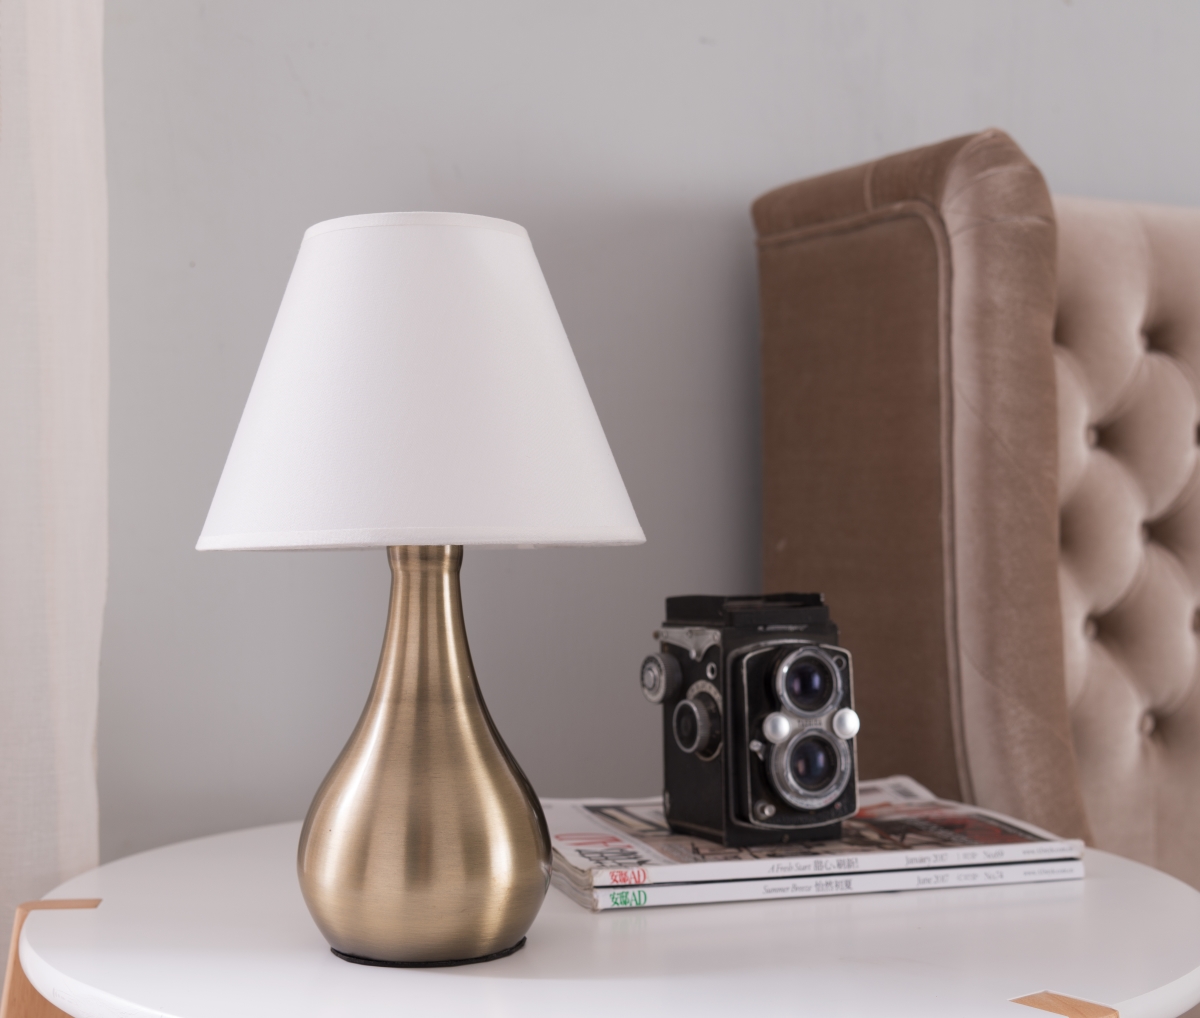 L1041 Table Lamp - Brushed Gold & White Shade, 13 X 8 X 8 In.